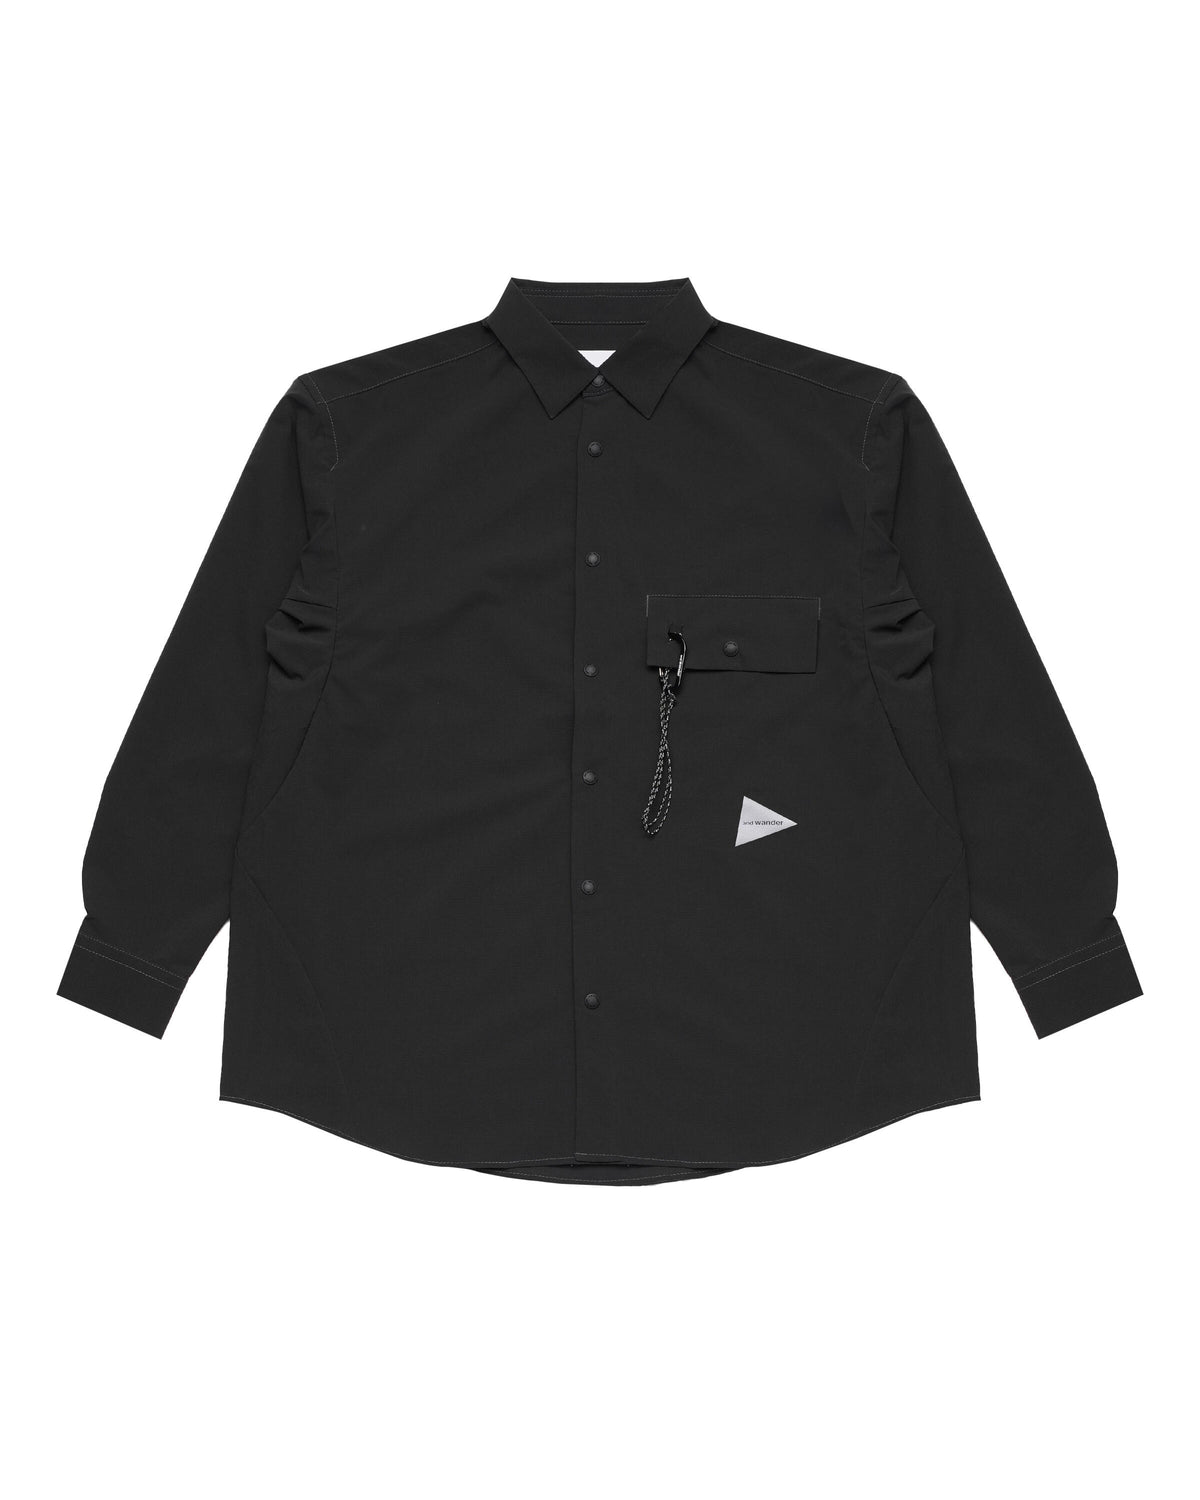 and wander dry breathable shirt